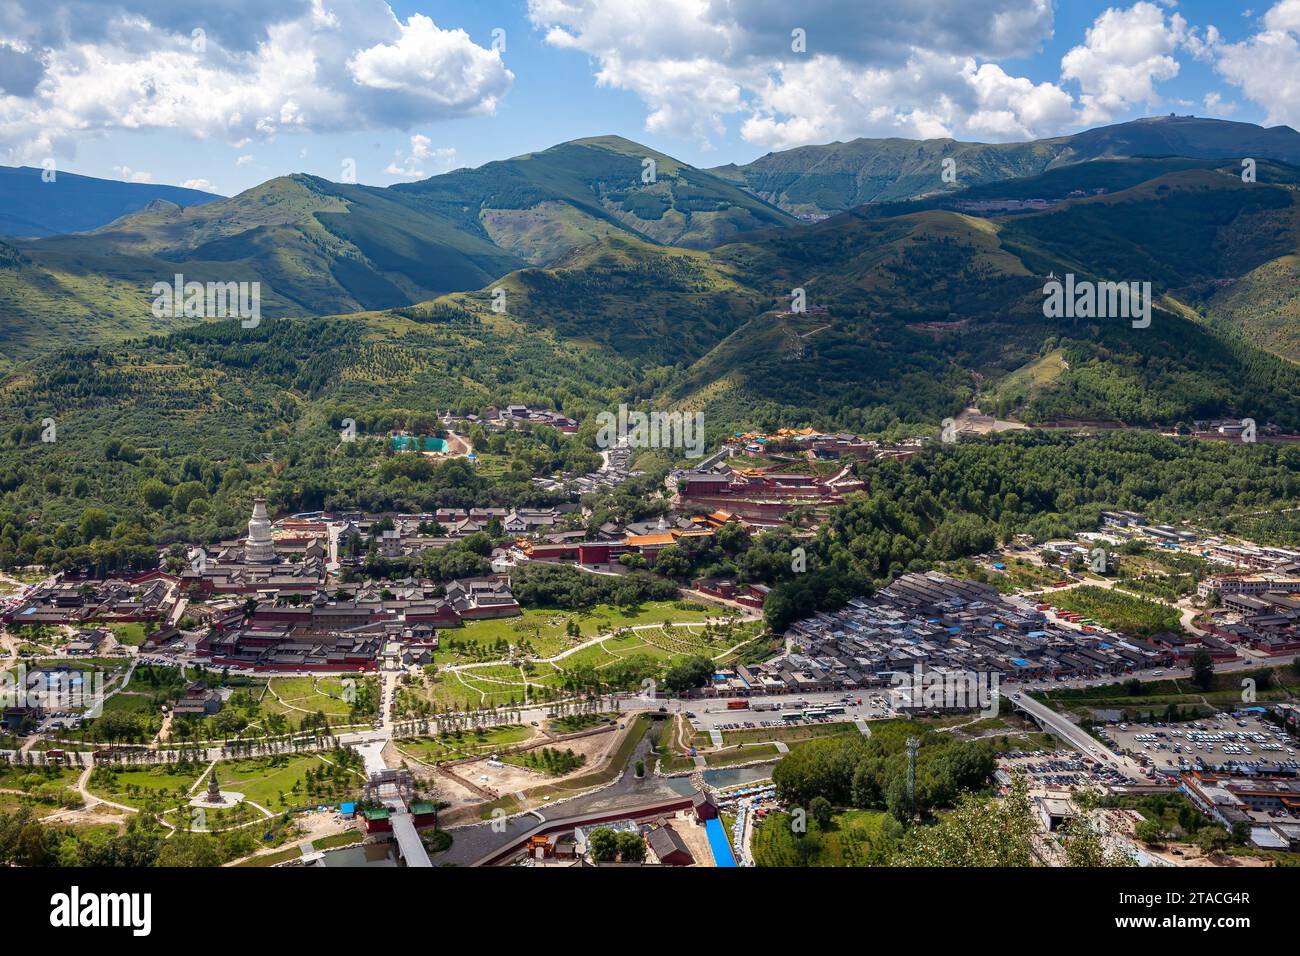 The Temples of Wutai Shan in China Stock Photo